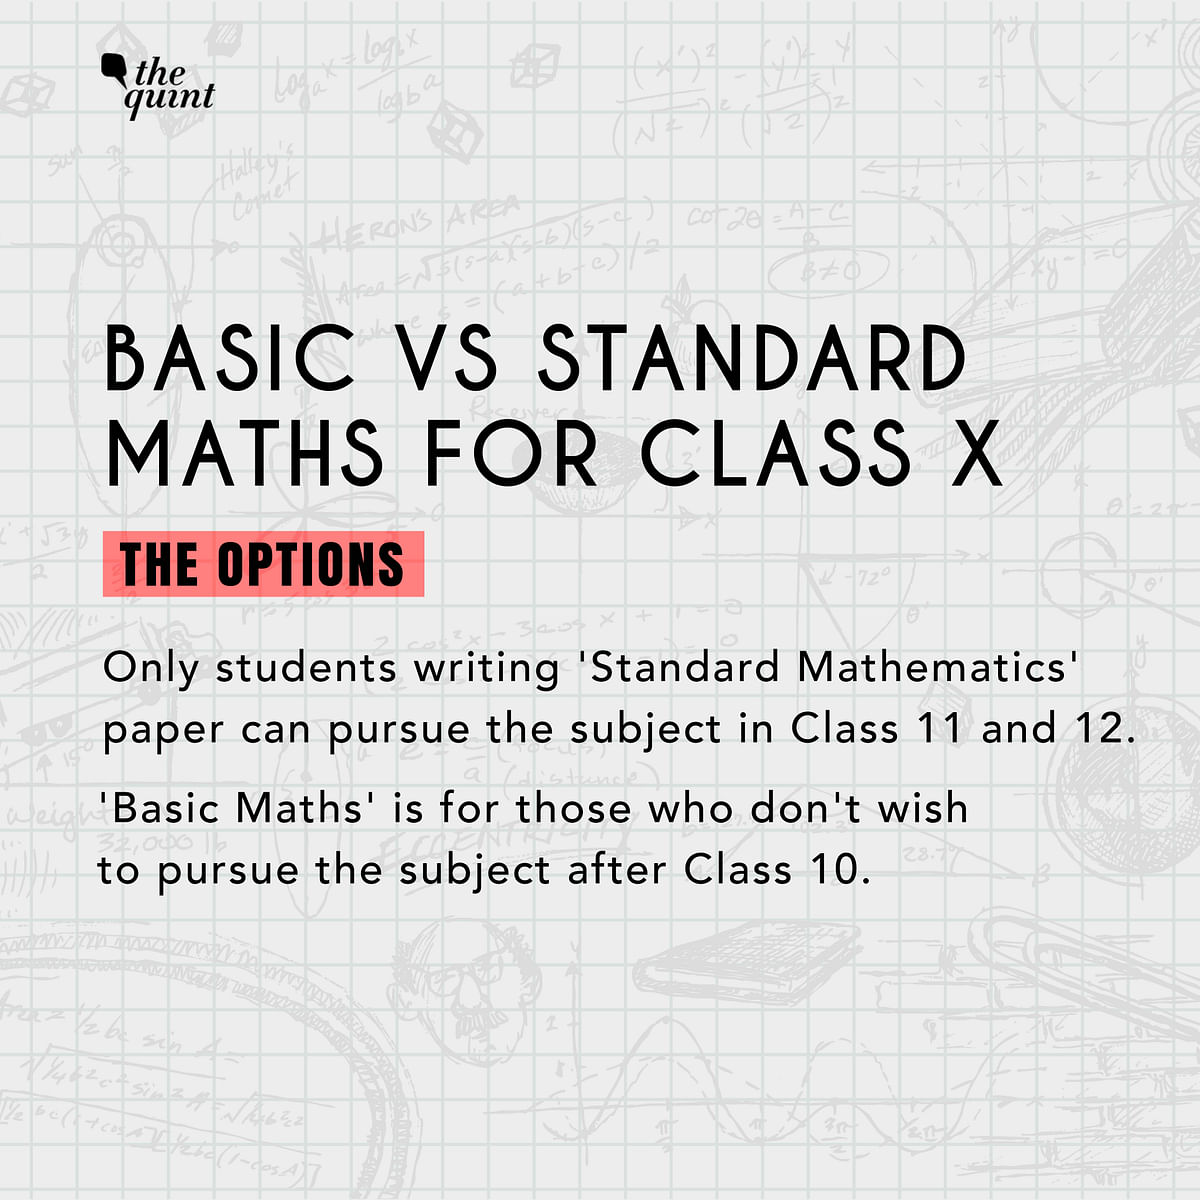 The 2-level system was introduced to “reduce pressure” on students who don’t want to pursue Maths after Class 10.